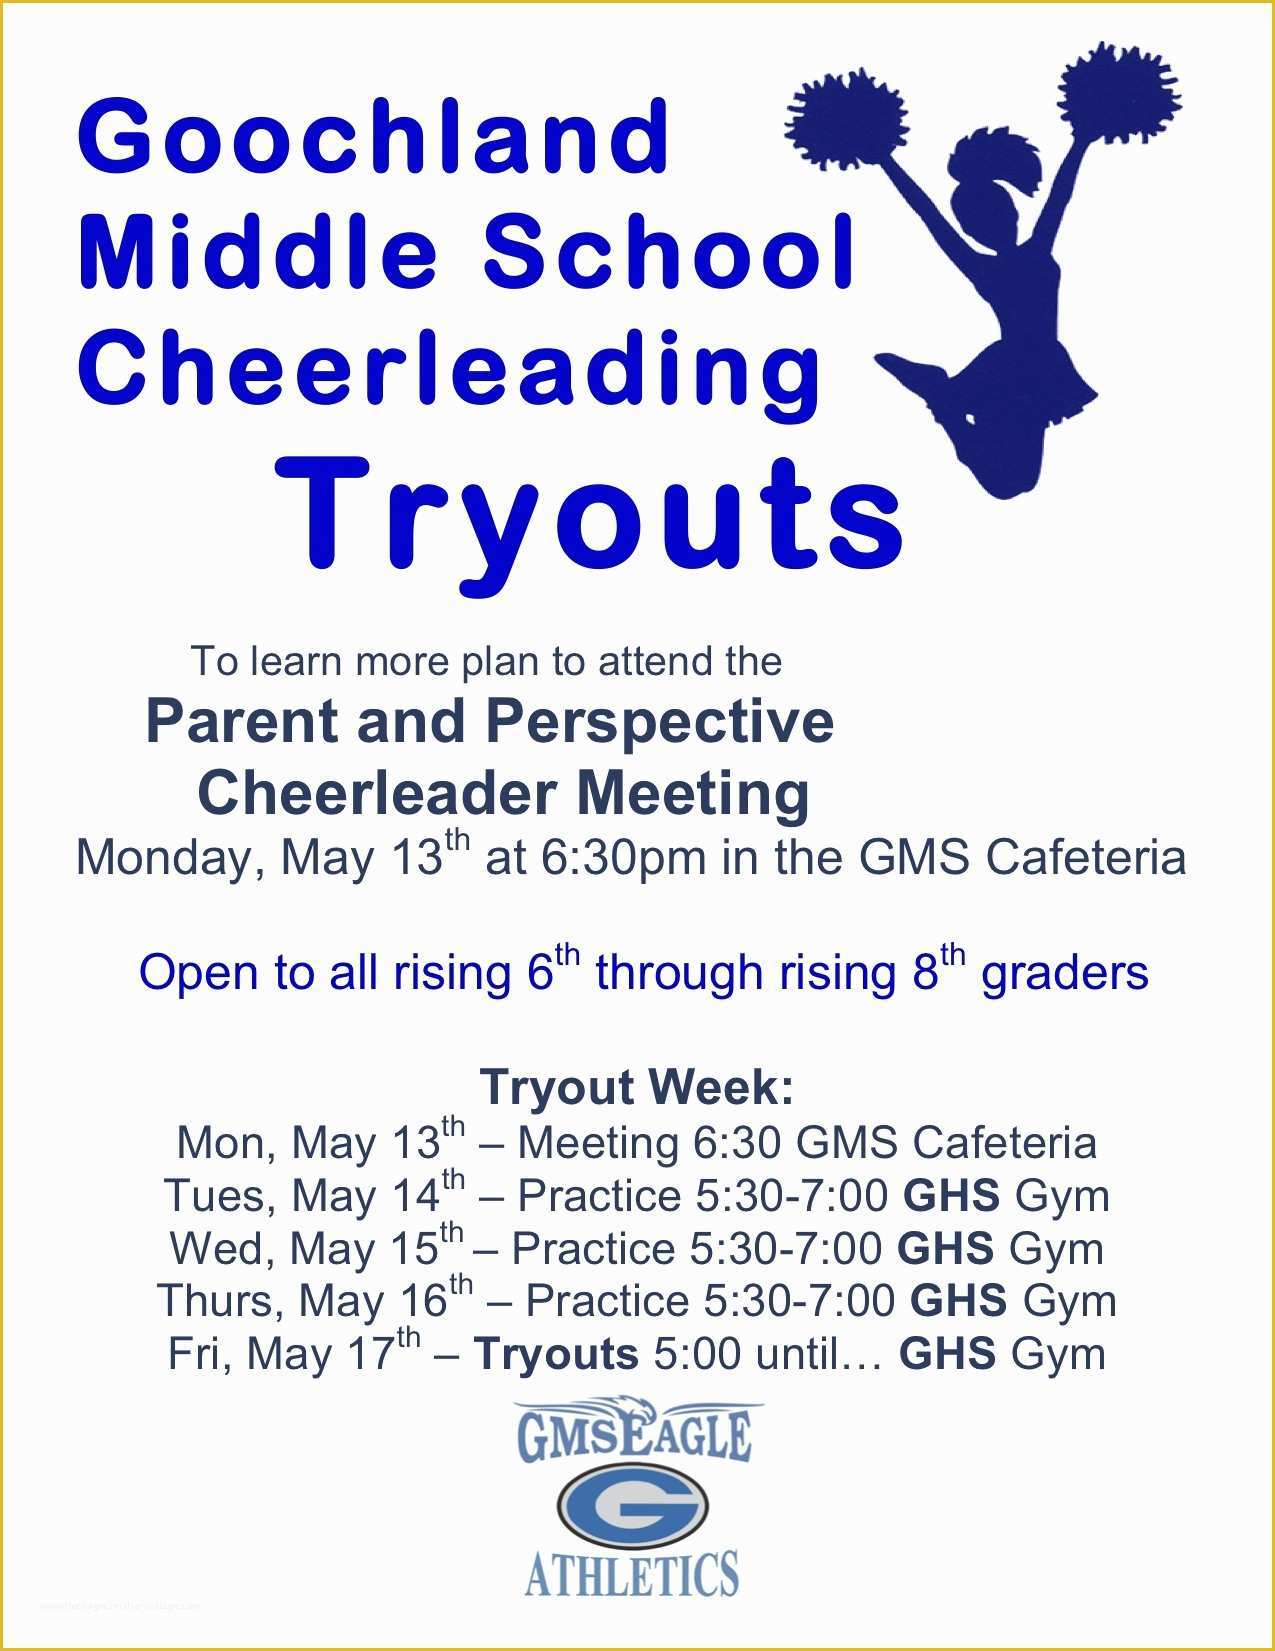 Free Cheerleading Tryout Flyer Template Of Cheerleading Quotes for Flyers Quotesgram